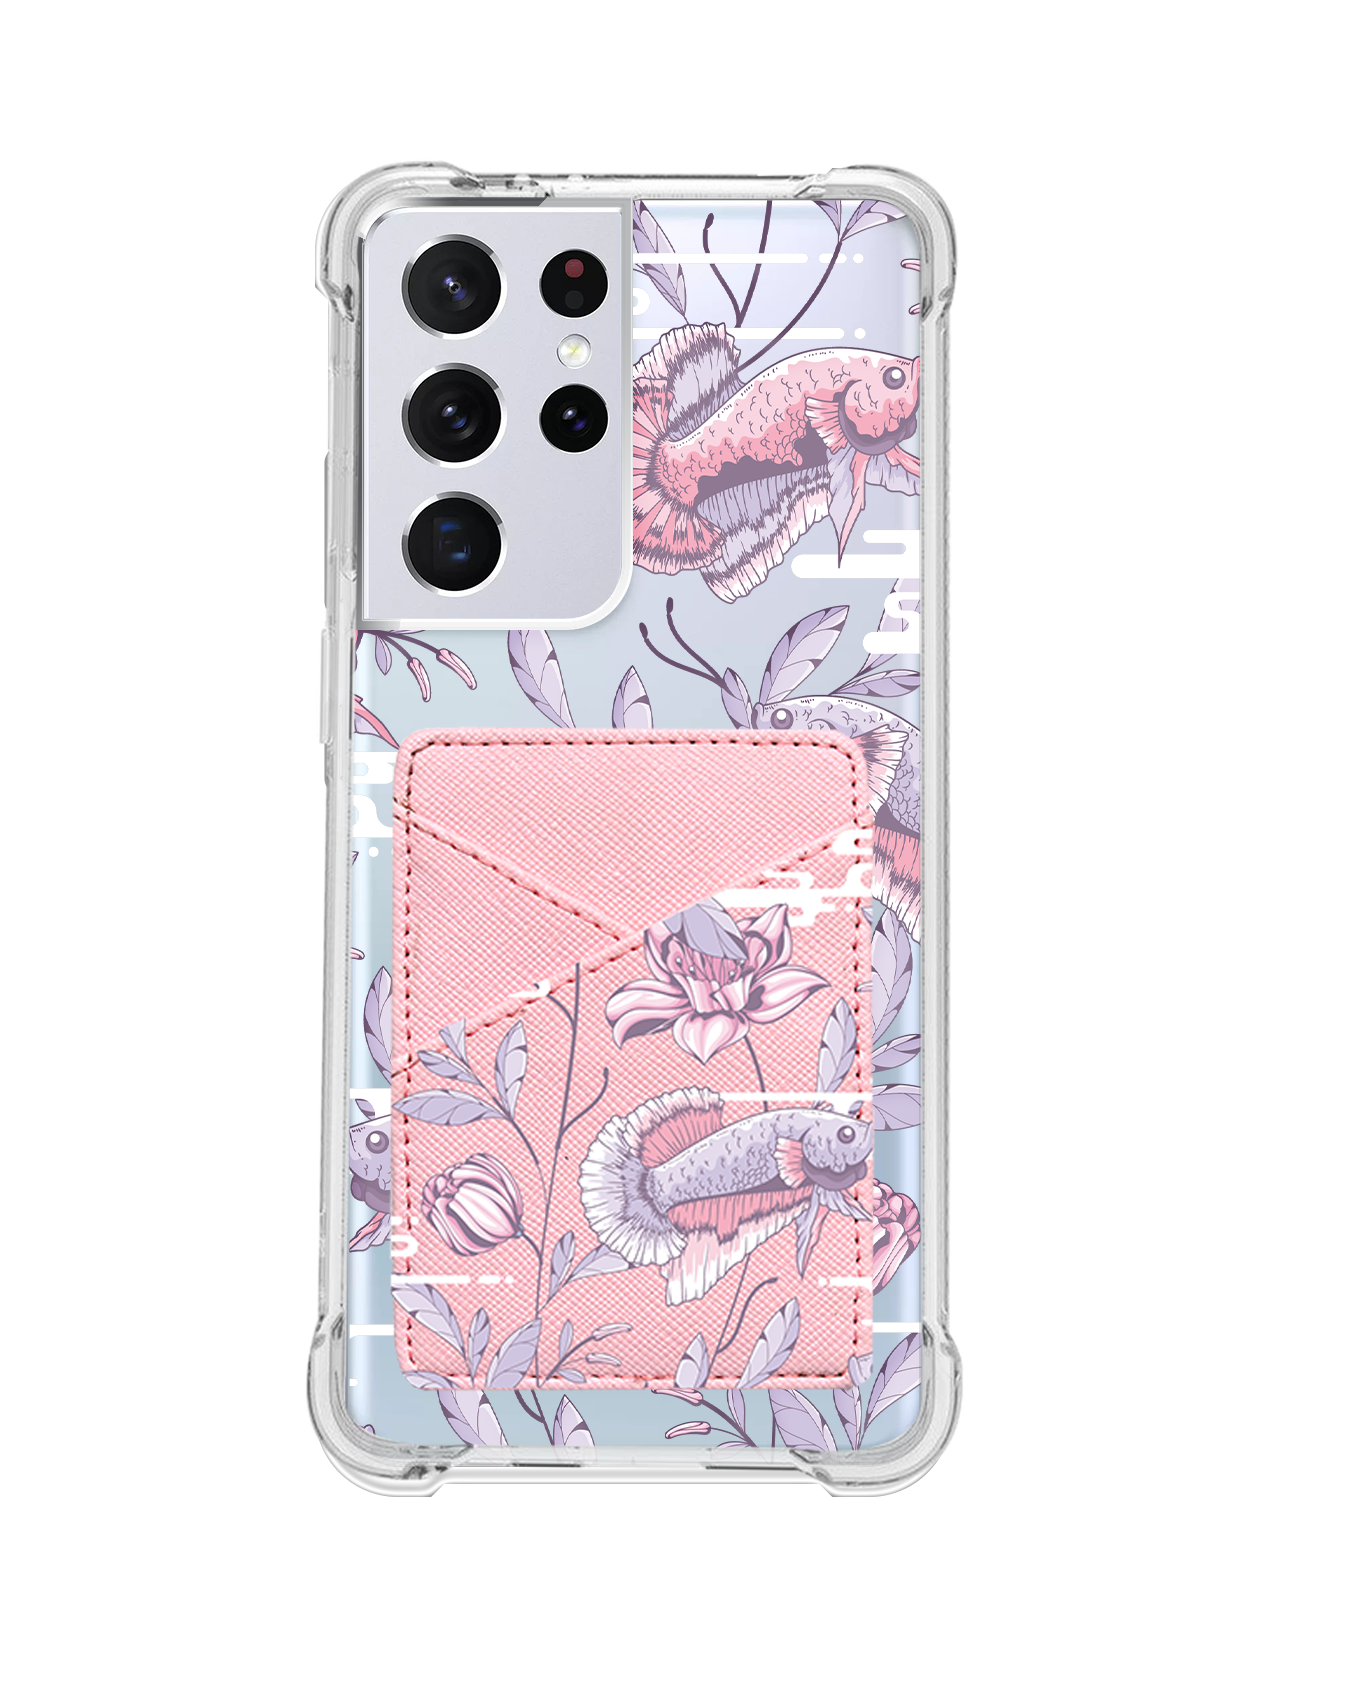 Android Phone Wallet Case - Fish & Floral 1.0